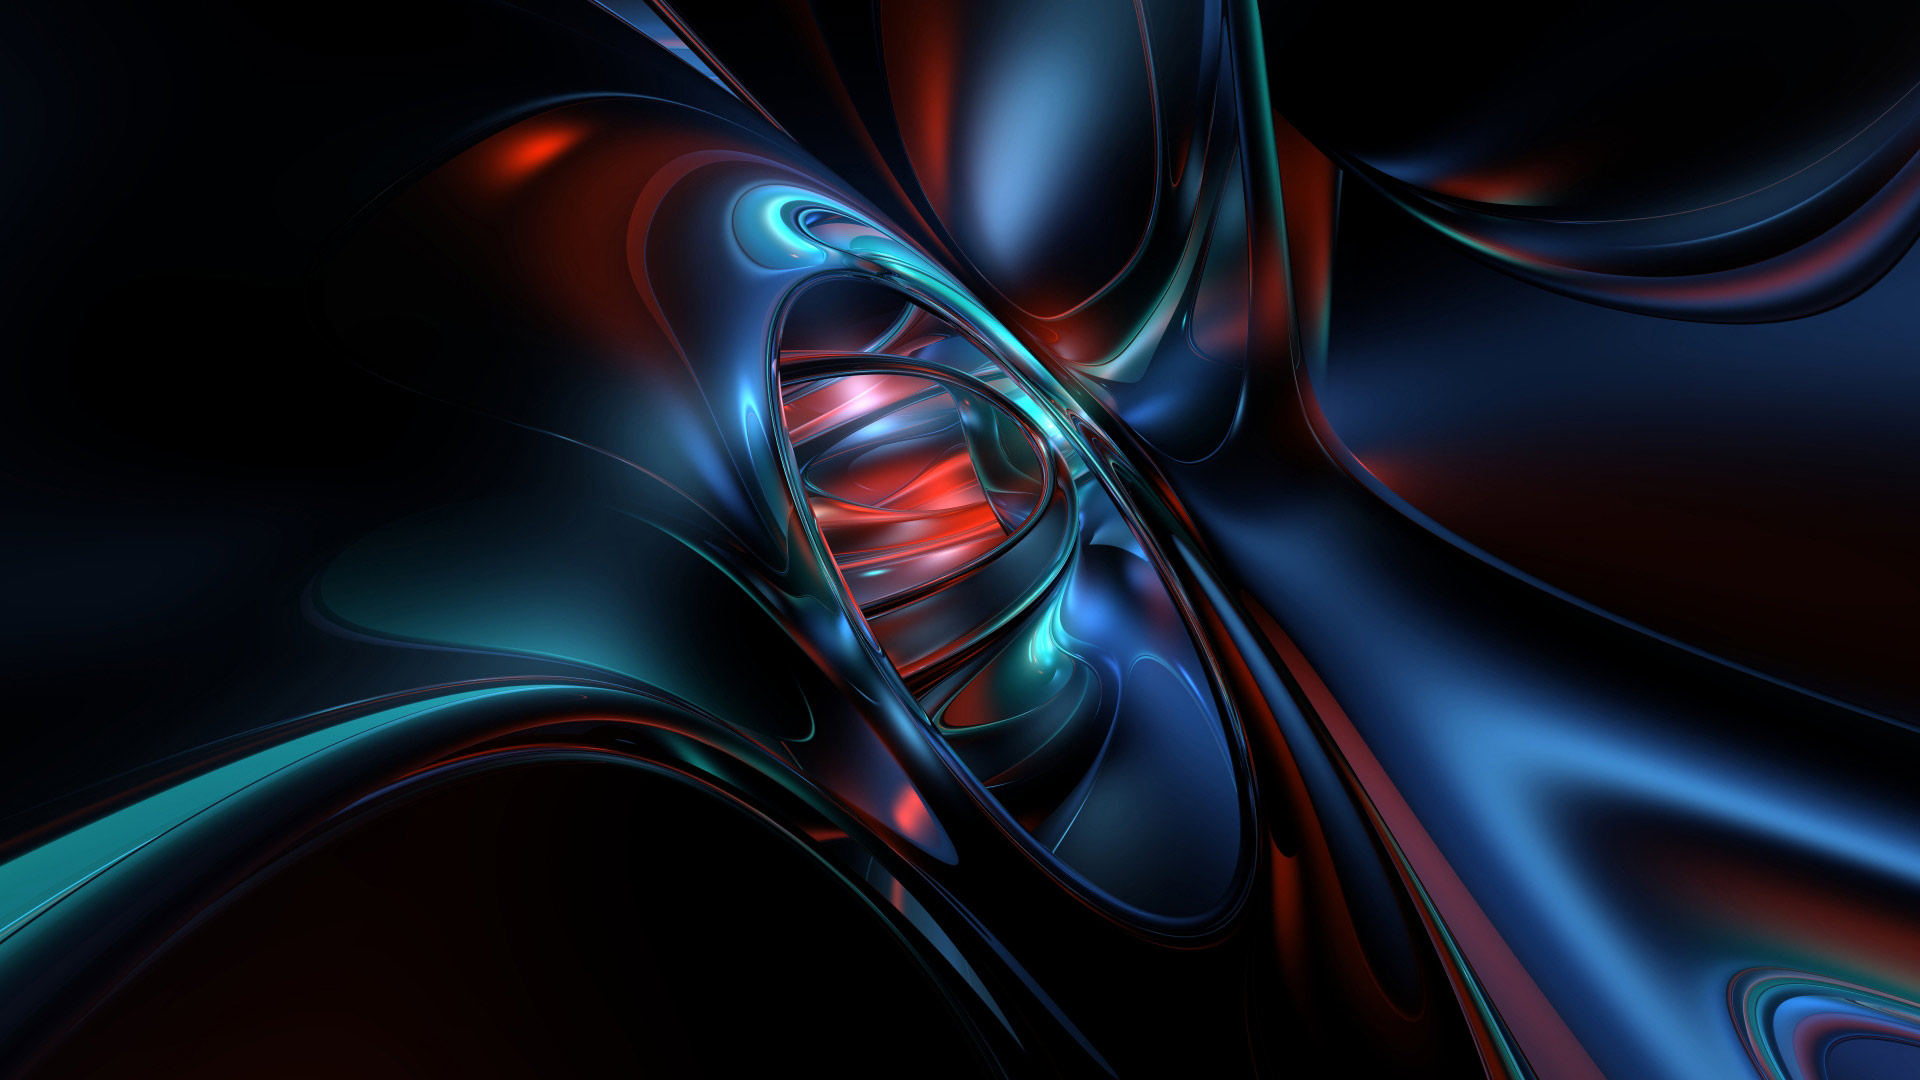 Dark 3D Abstract Wallpapers HD Wallpapers 1920x1080